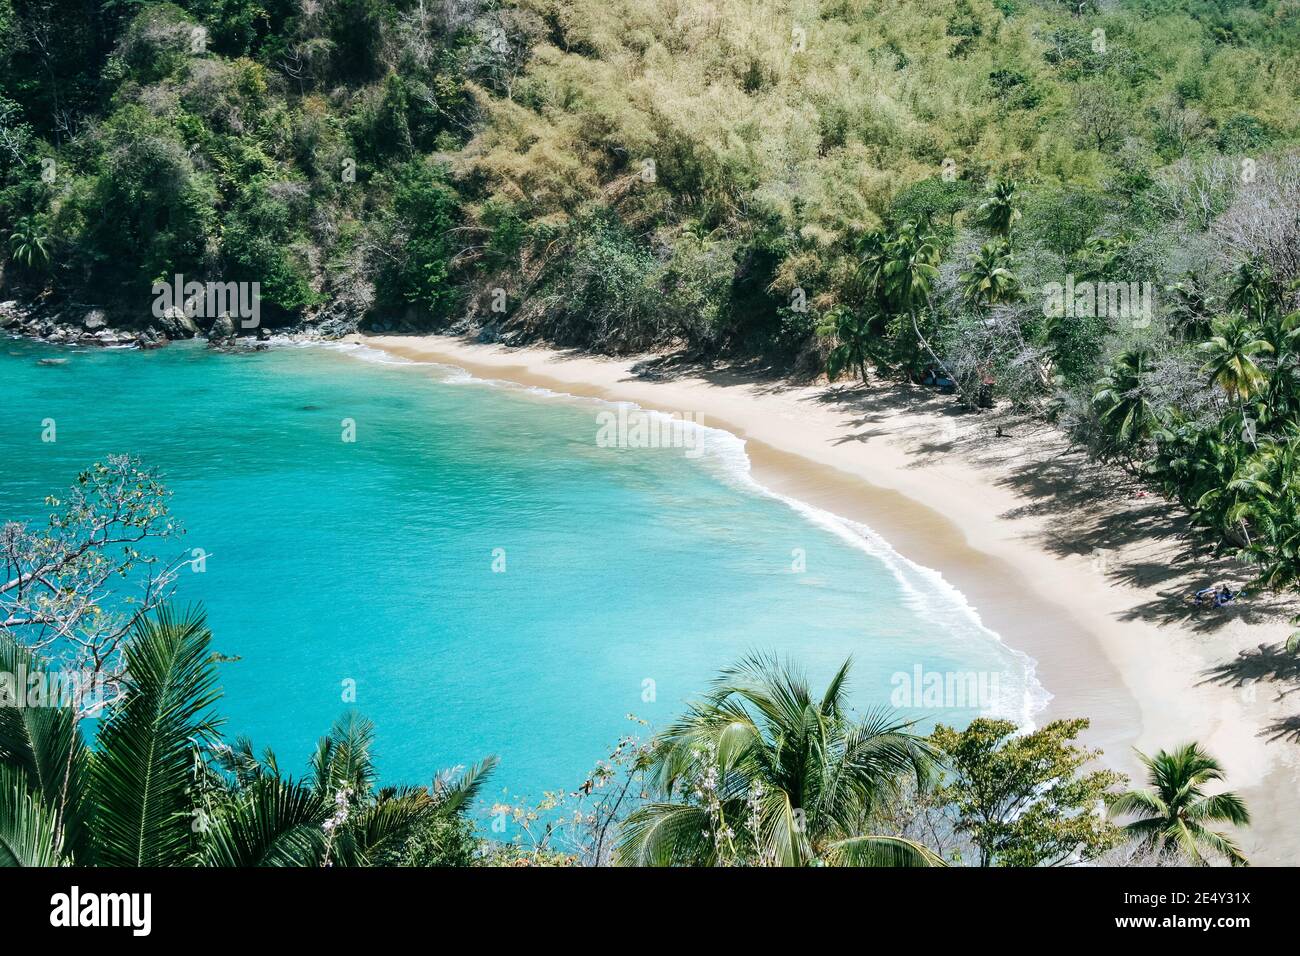 Beautiful turquoise waters of Englishman's bay on the tropical Caribbean island Tobago Stock Photo